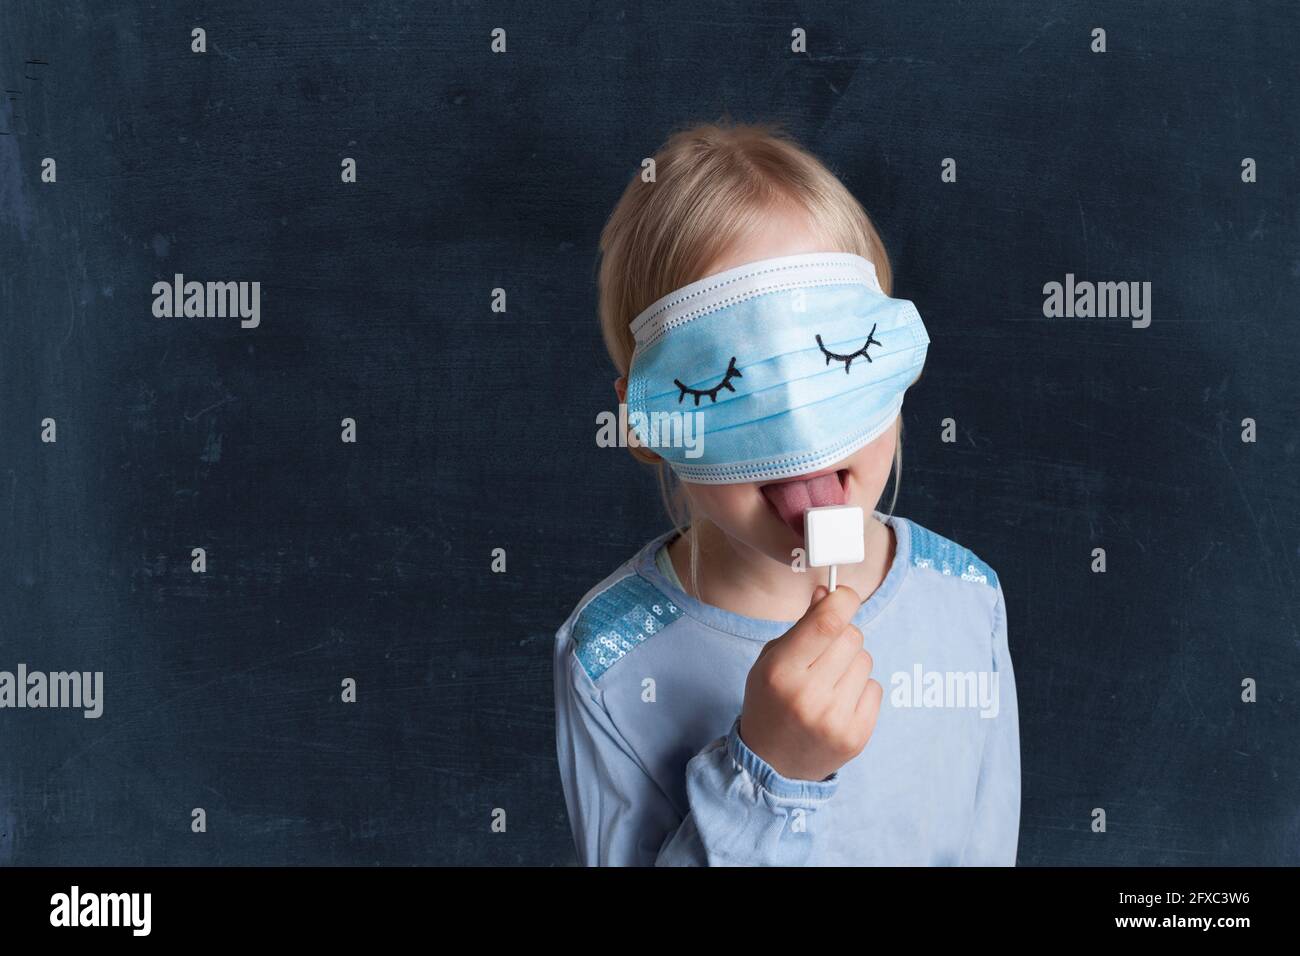 Girl with protective face mask licking lollipop against black background Stock Photo